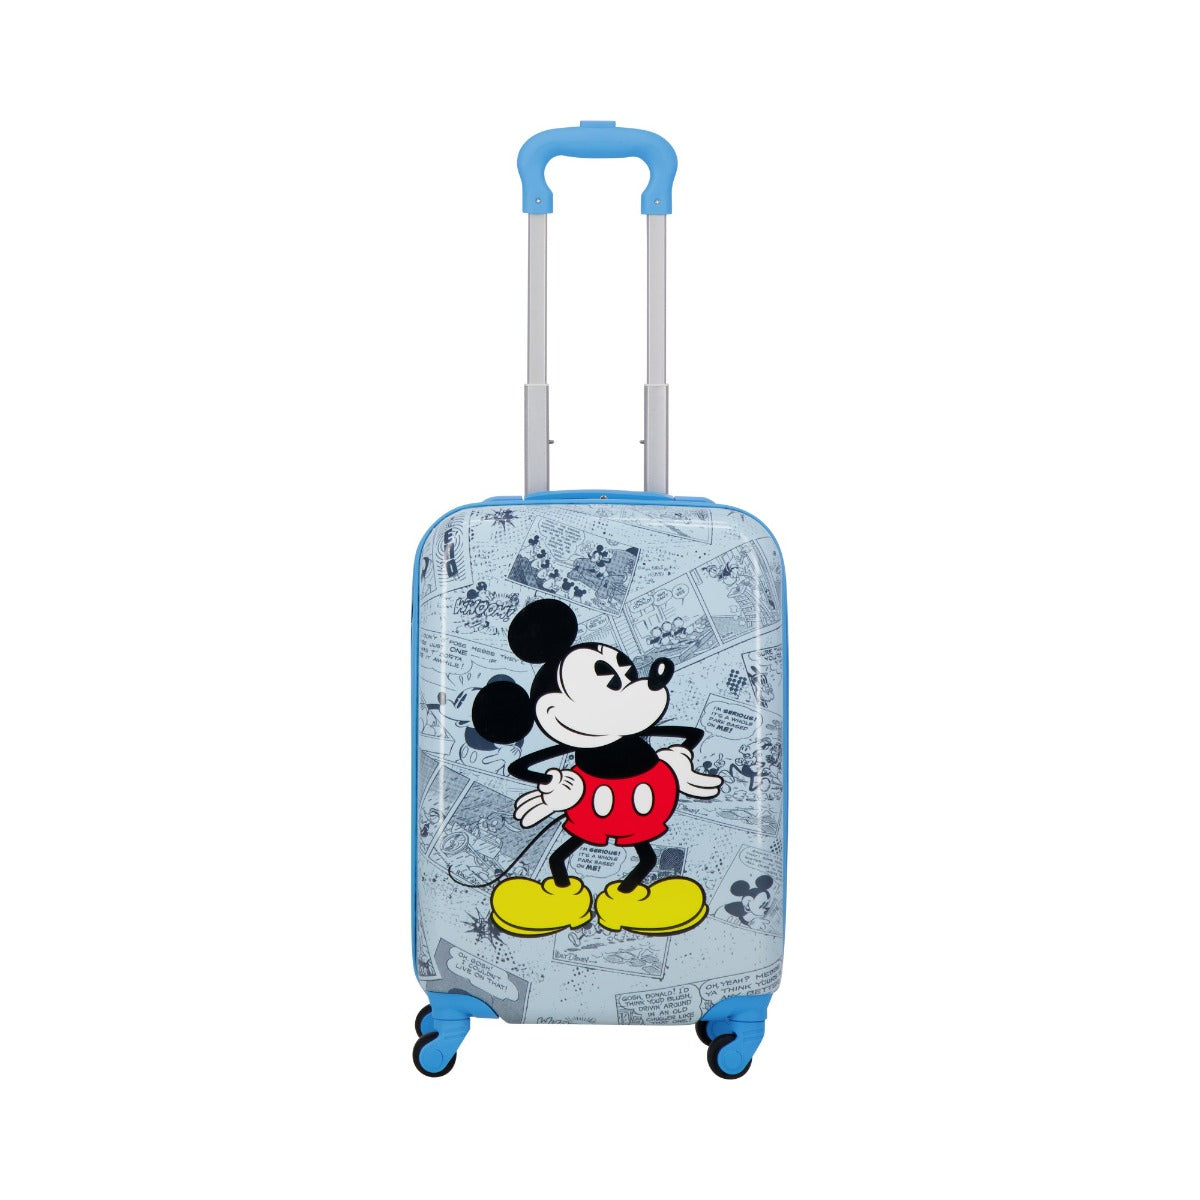 Blue Disney Heritage Mikey Mouse matching 2 piece set - 21" spinner suitcase for kids